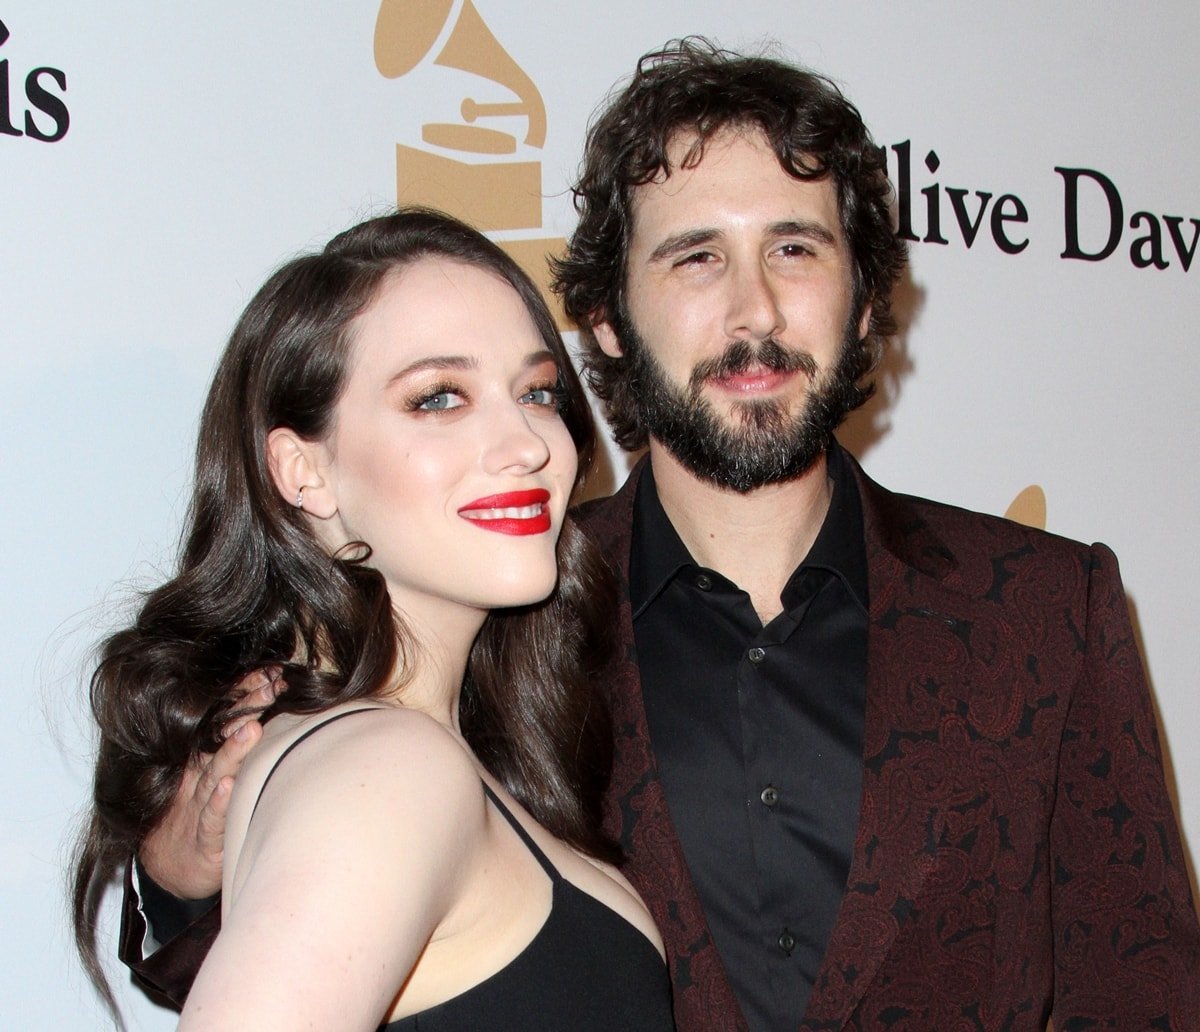 Kat Dennings and Josh Groban started dating in October 2014 and split in August 2016